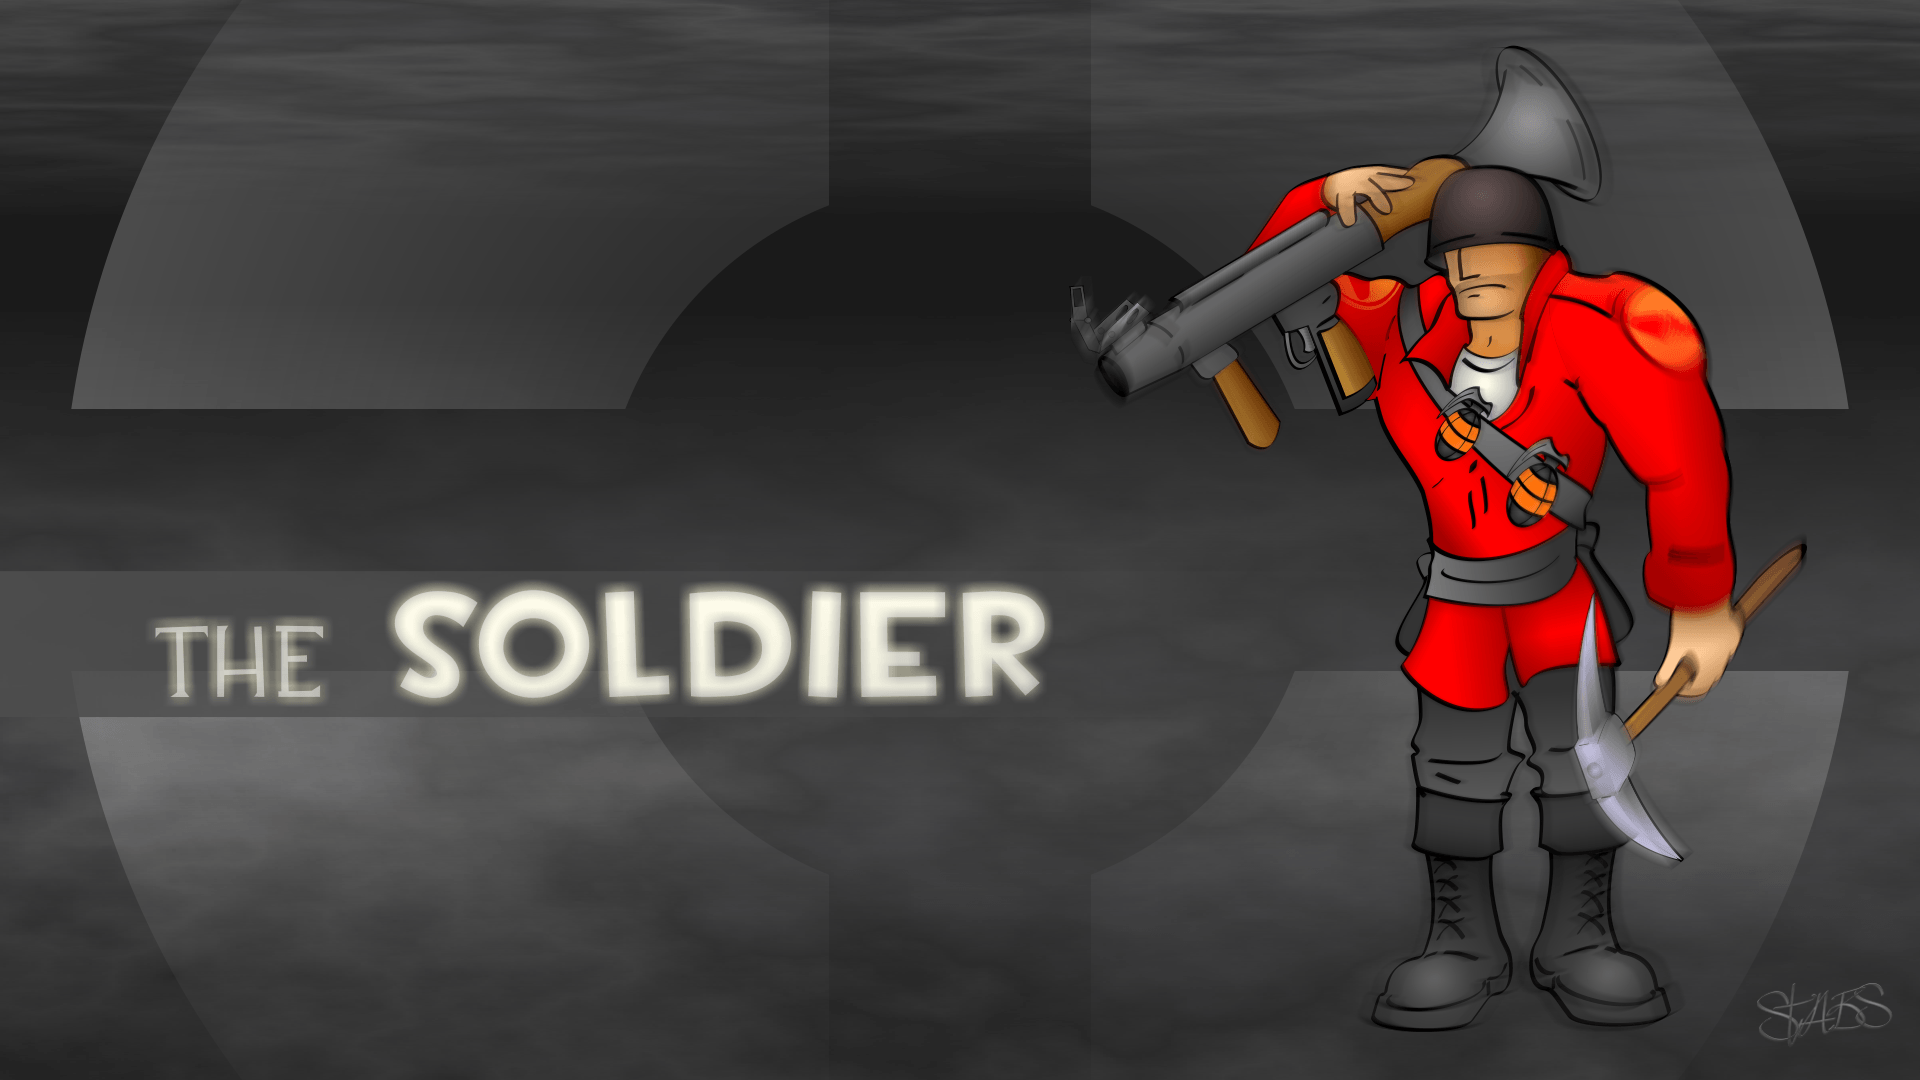 Team Fortress 2 Soldier Wallpapers - Wallpaper Cave - 1920 x 1080 png 322kB